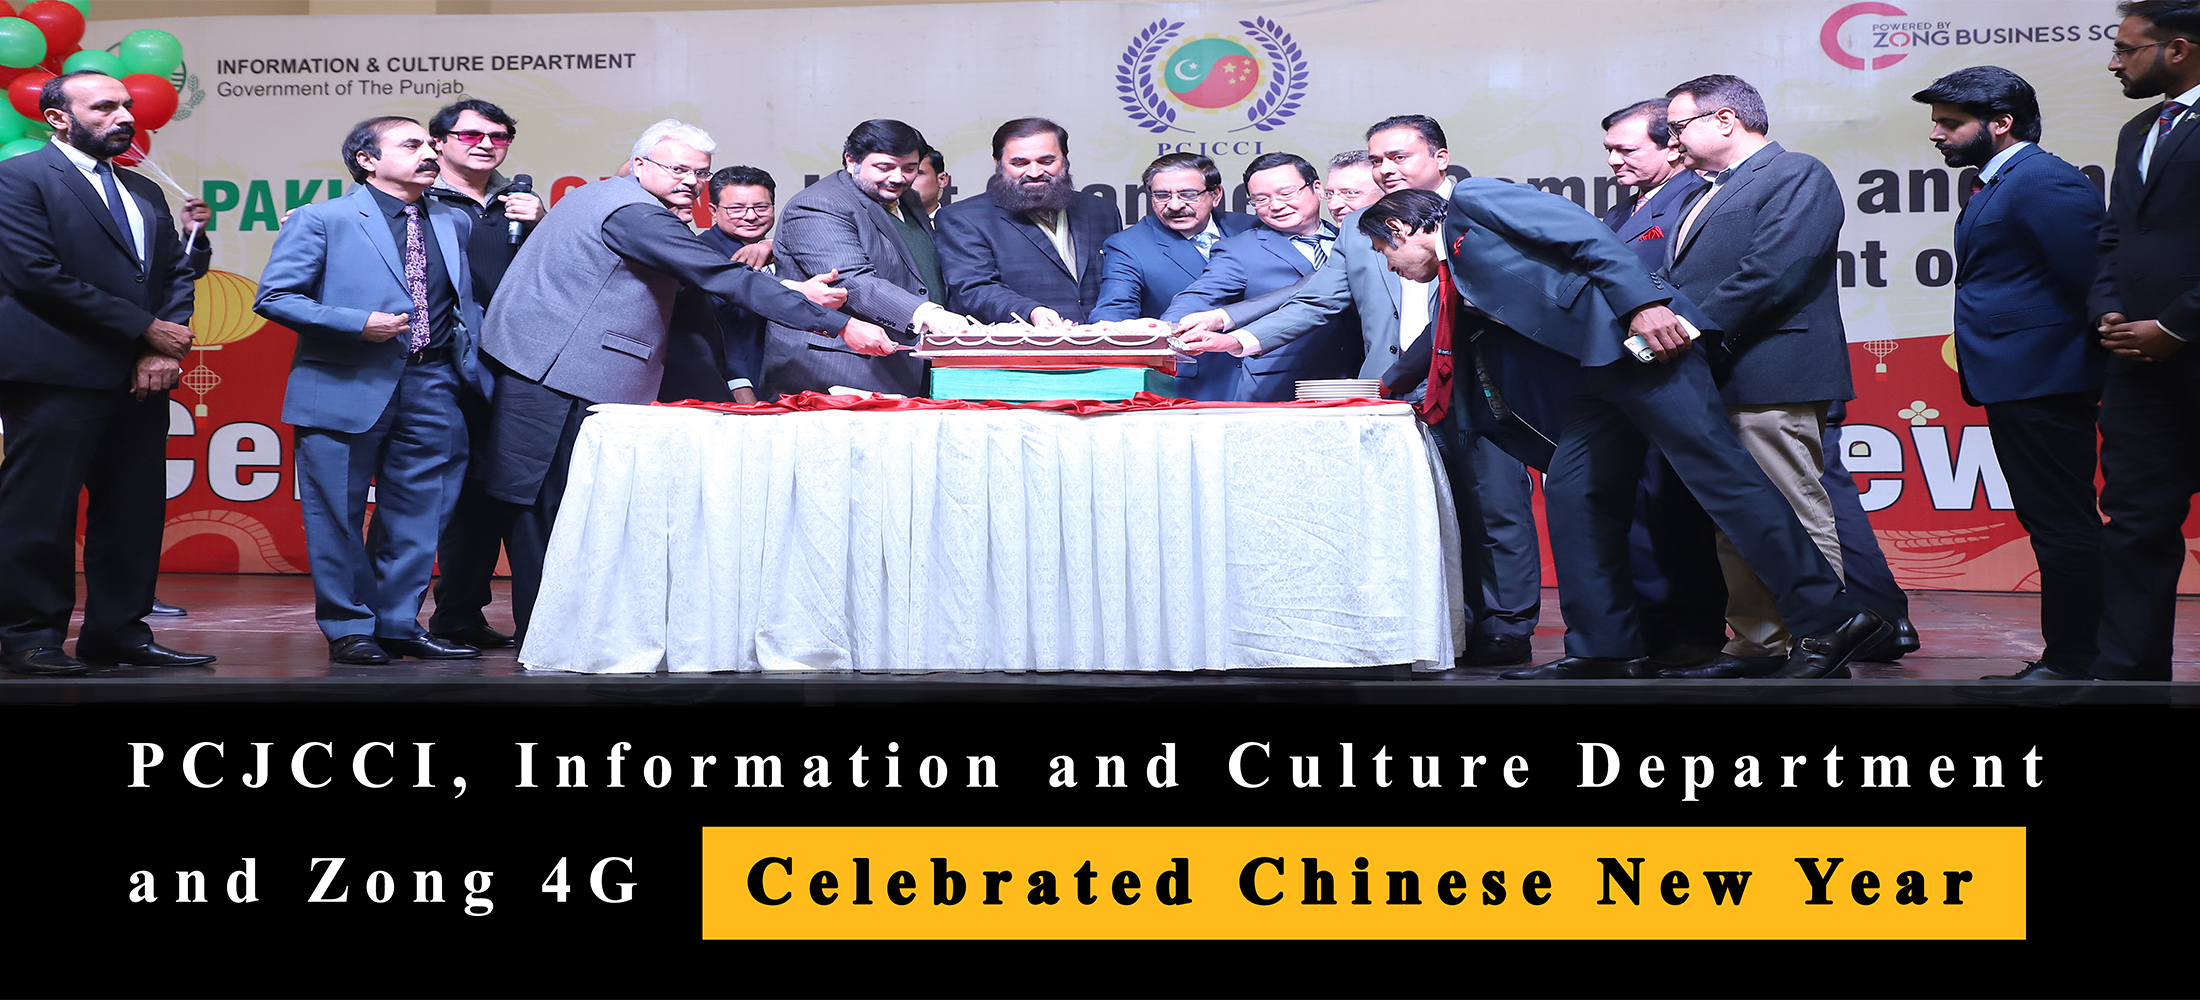 PCJCCI, Information and Culture Department and ZONG 4G Celebrated Chinese New Year